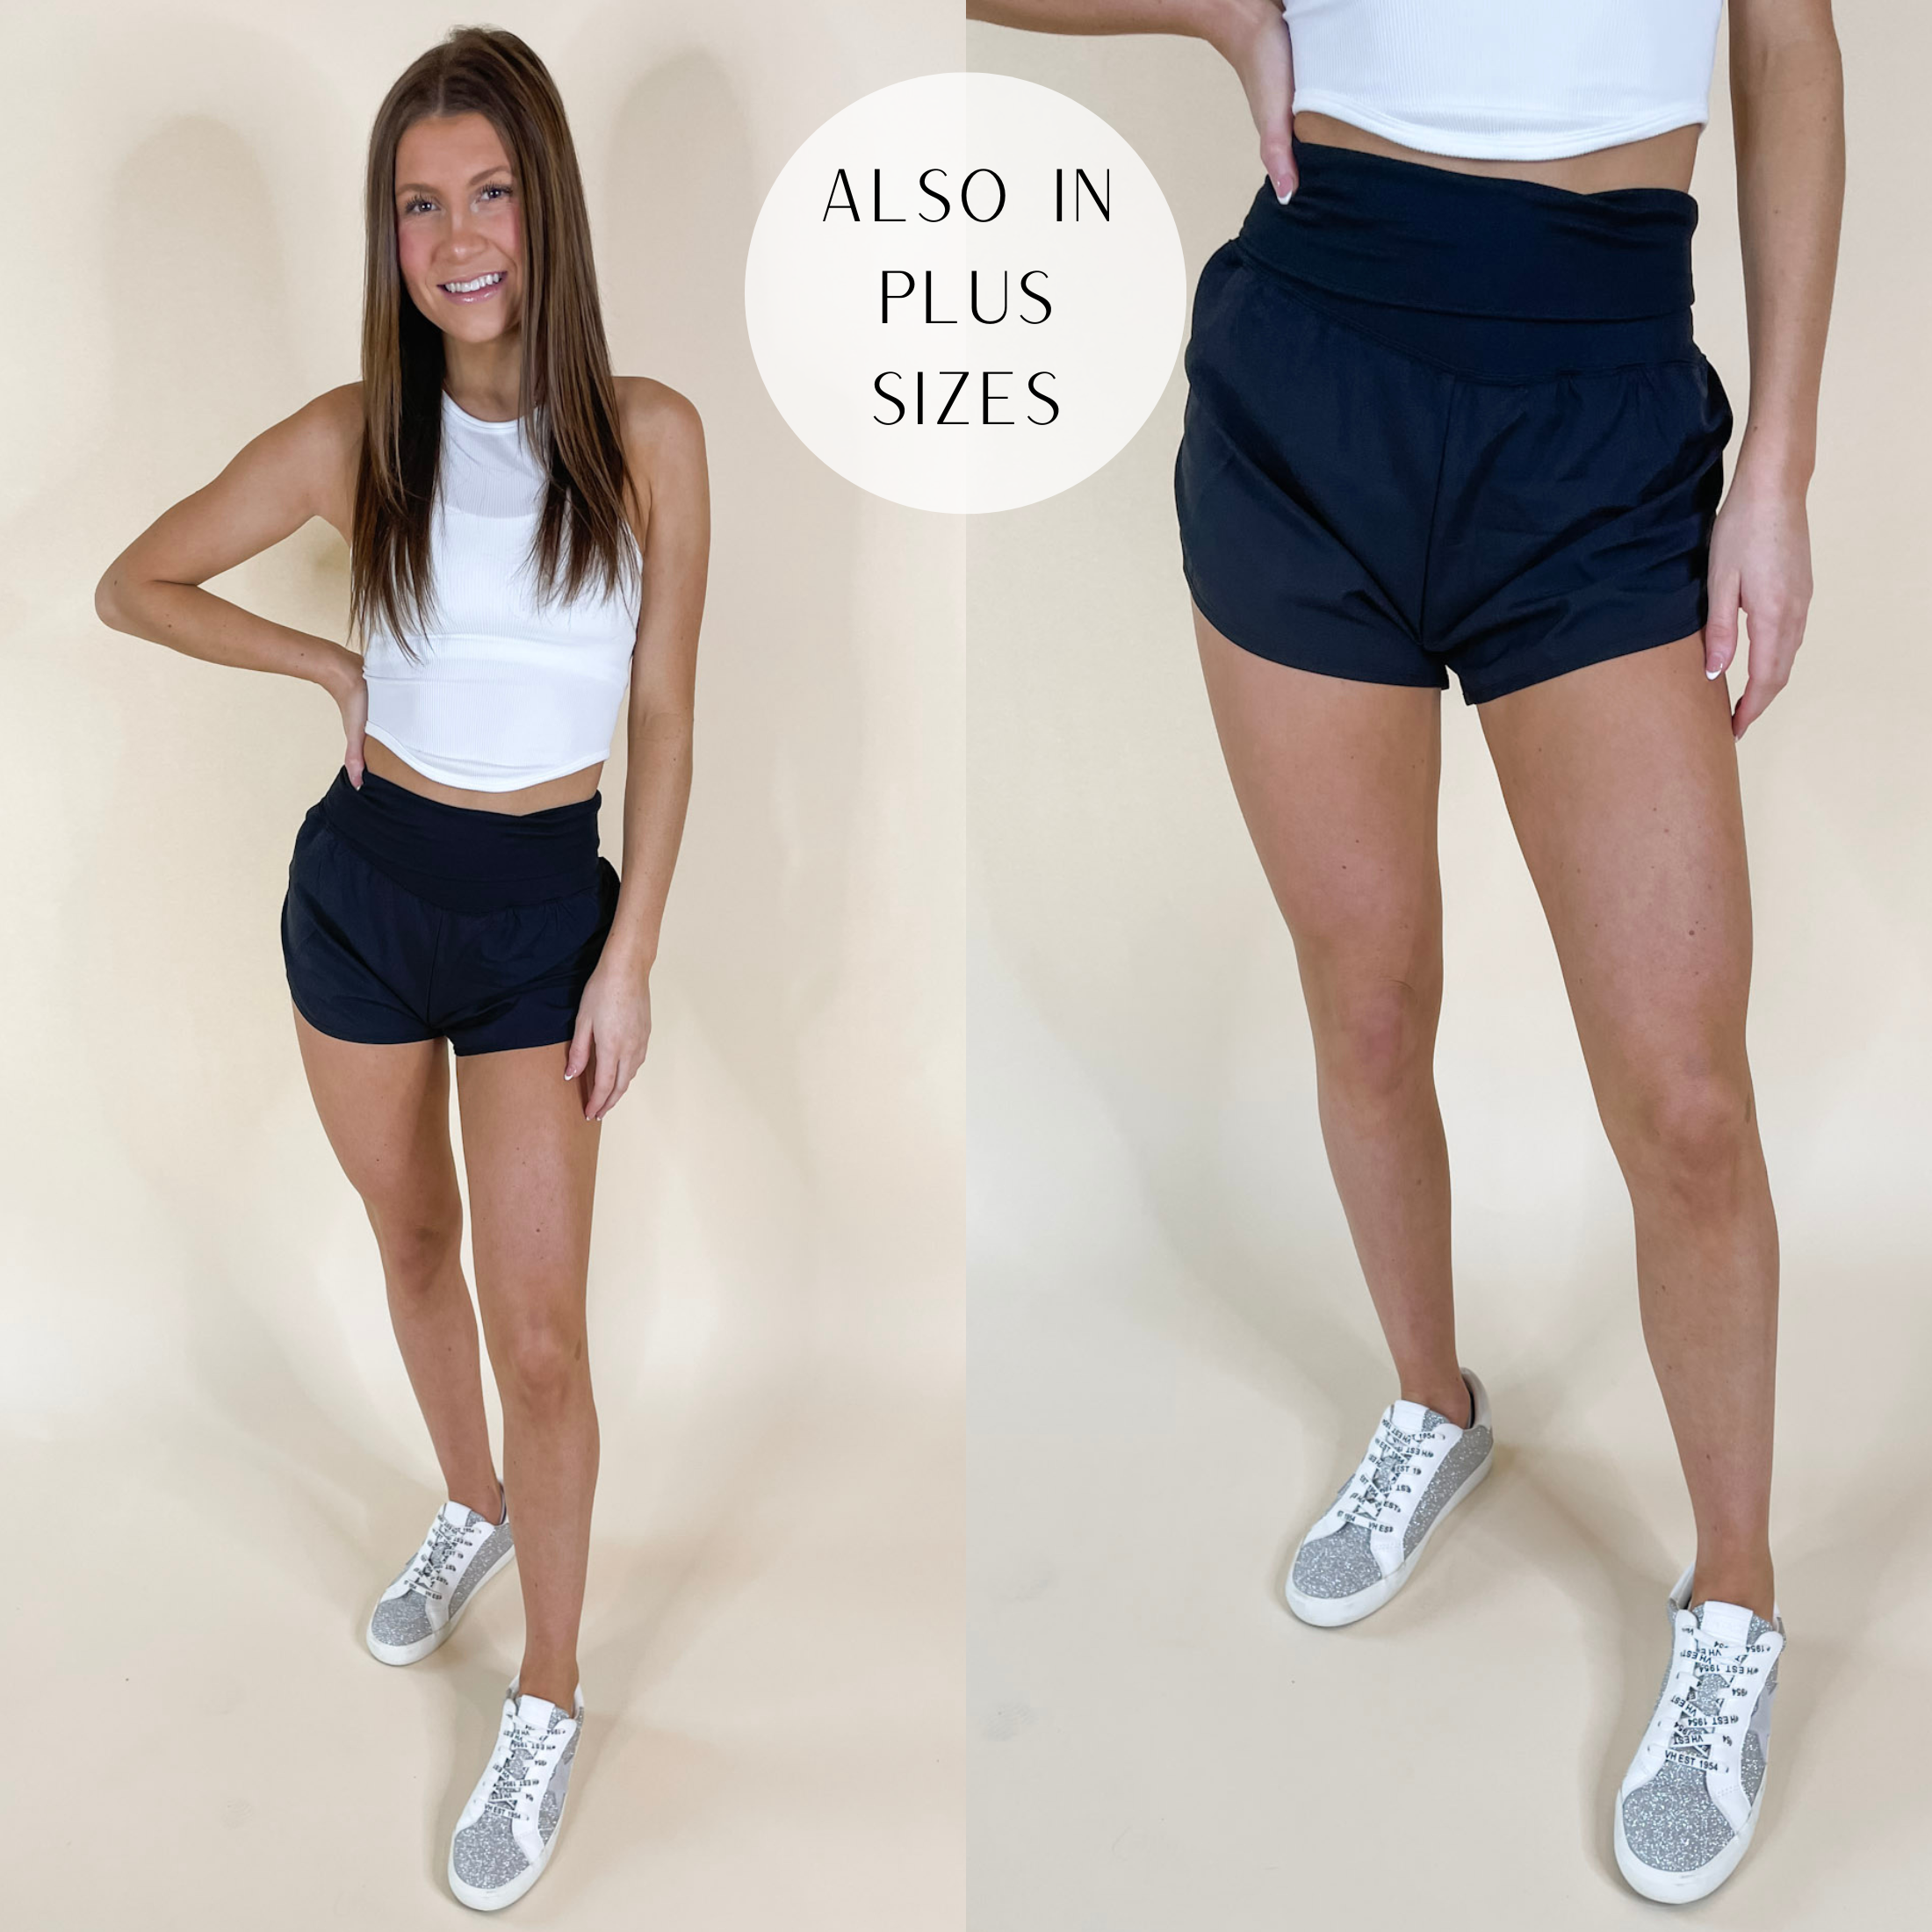 Model is wearing a pair of high waist running shorts that have a fold-over waist band. Model has these Black shorts paired with white sneakers and a white tank top.